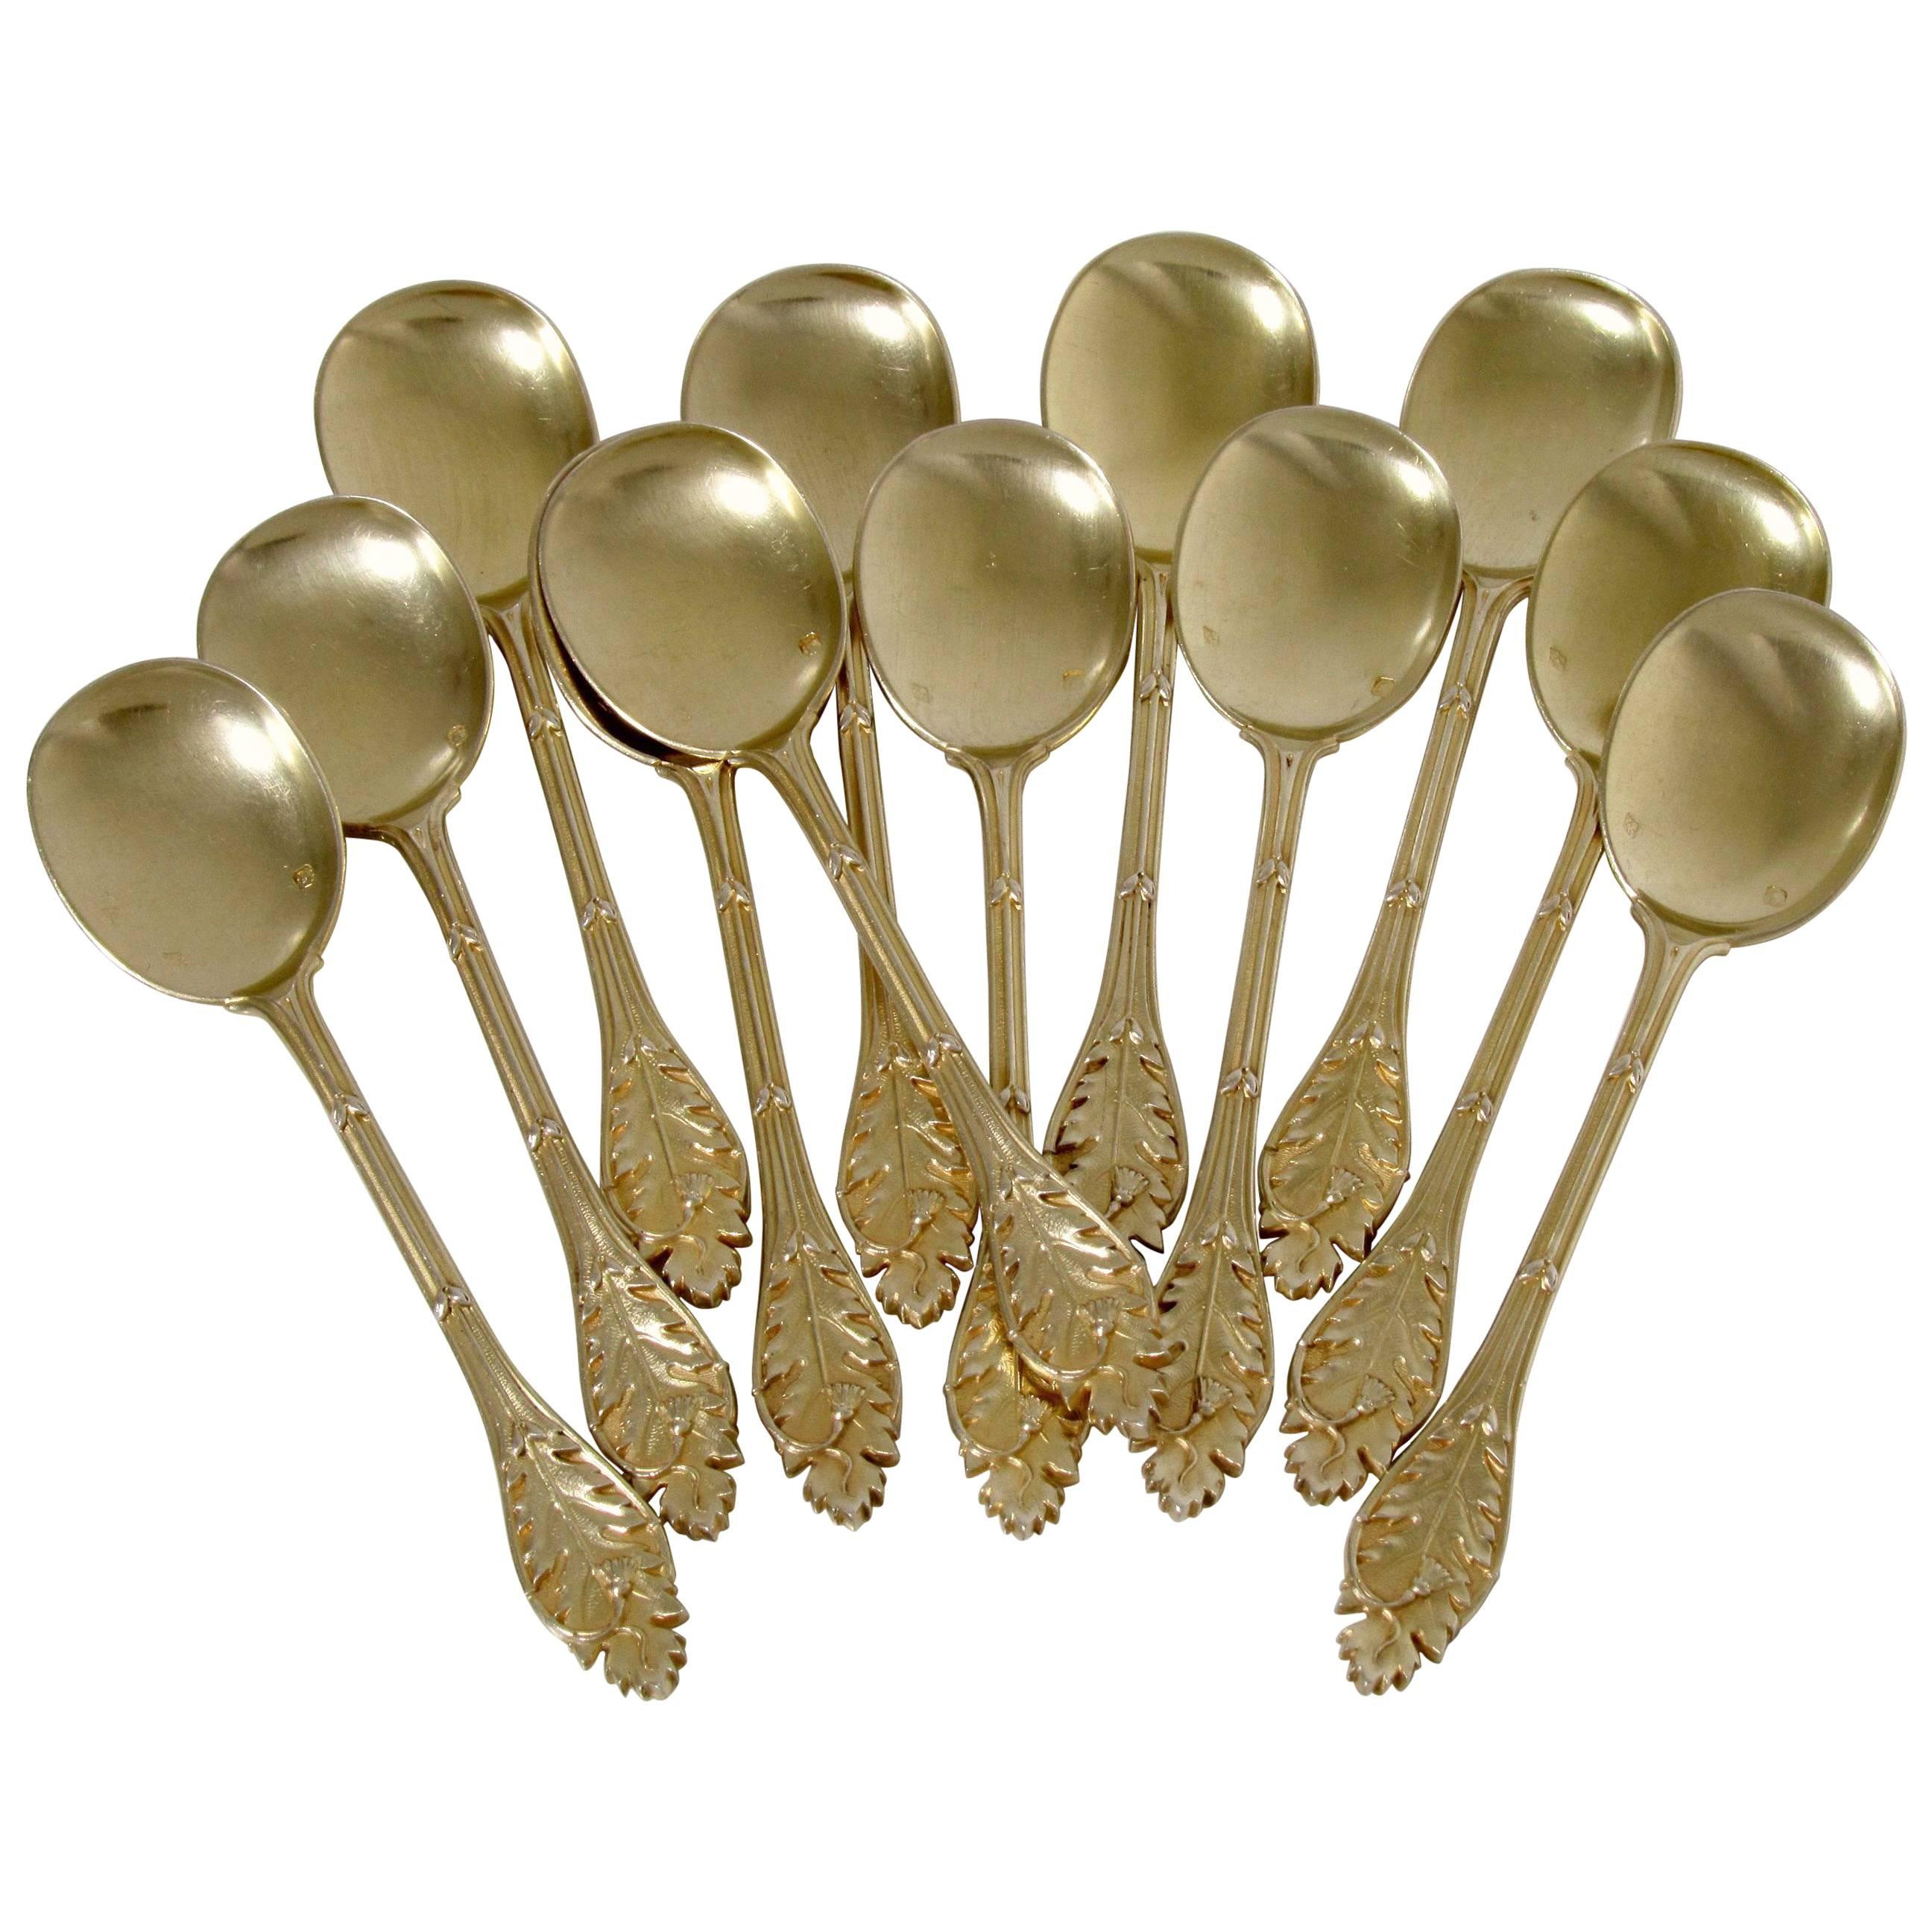 Linzeler Masterpiece French Sterling Silver Vermeil Ice Cream Spoons Set 12 pc For Sale